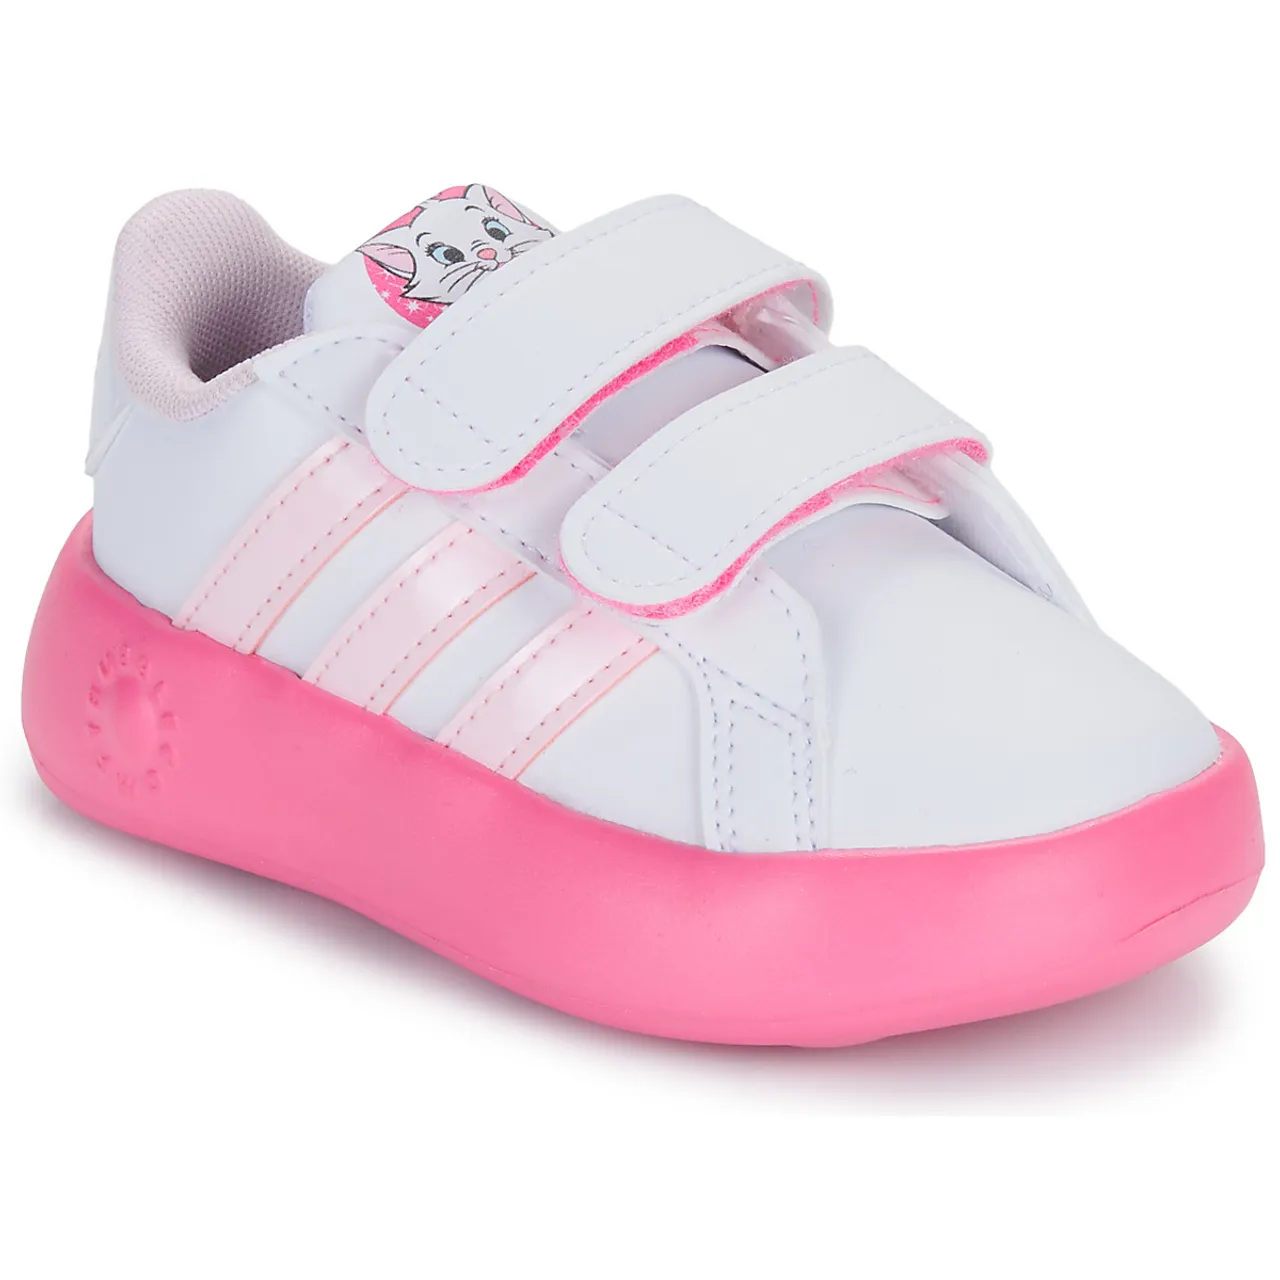 adidas  GRAND COURT 2.0 Marie CF I  girls's Children's Shoes (Trainers) in White